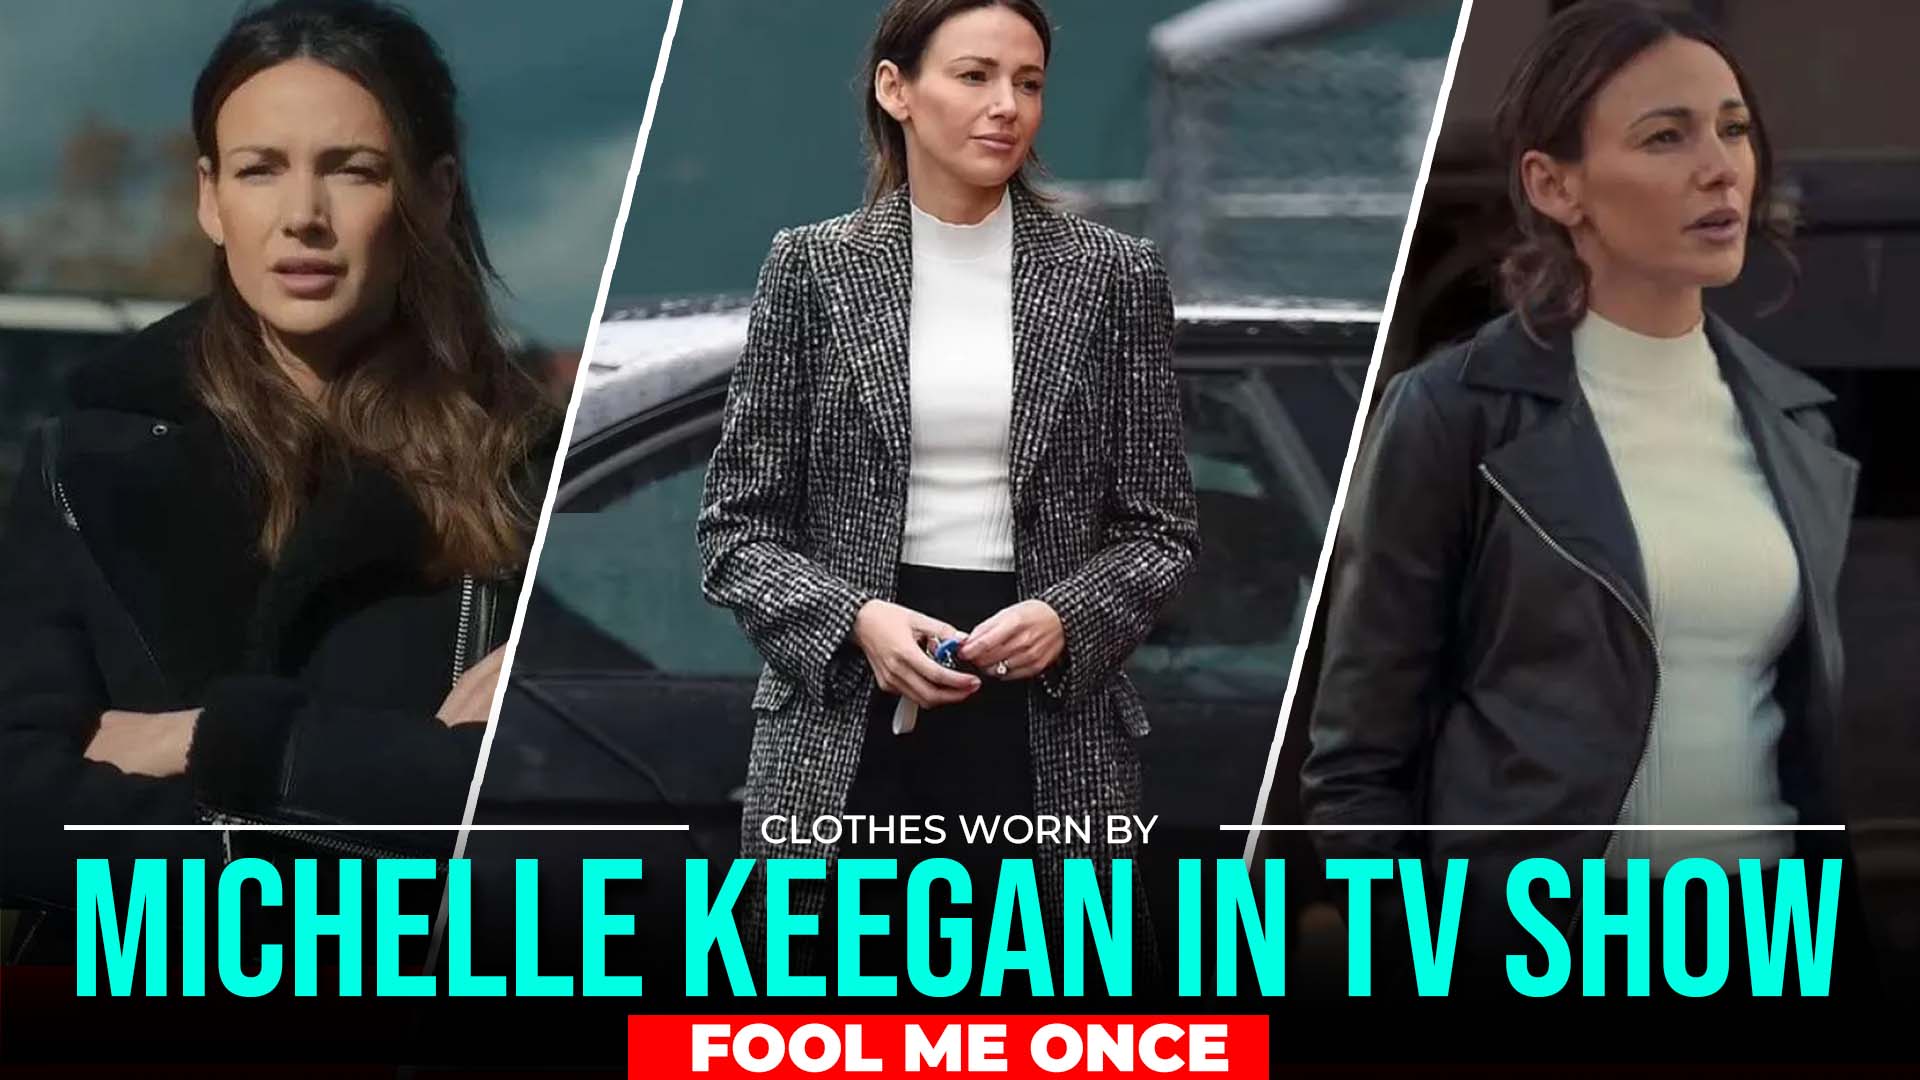 Clothes Worn By Michelle Keegan In TV show Fool Me Once